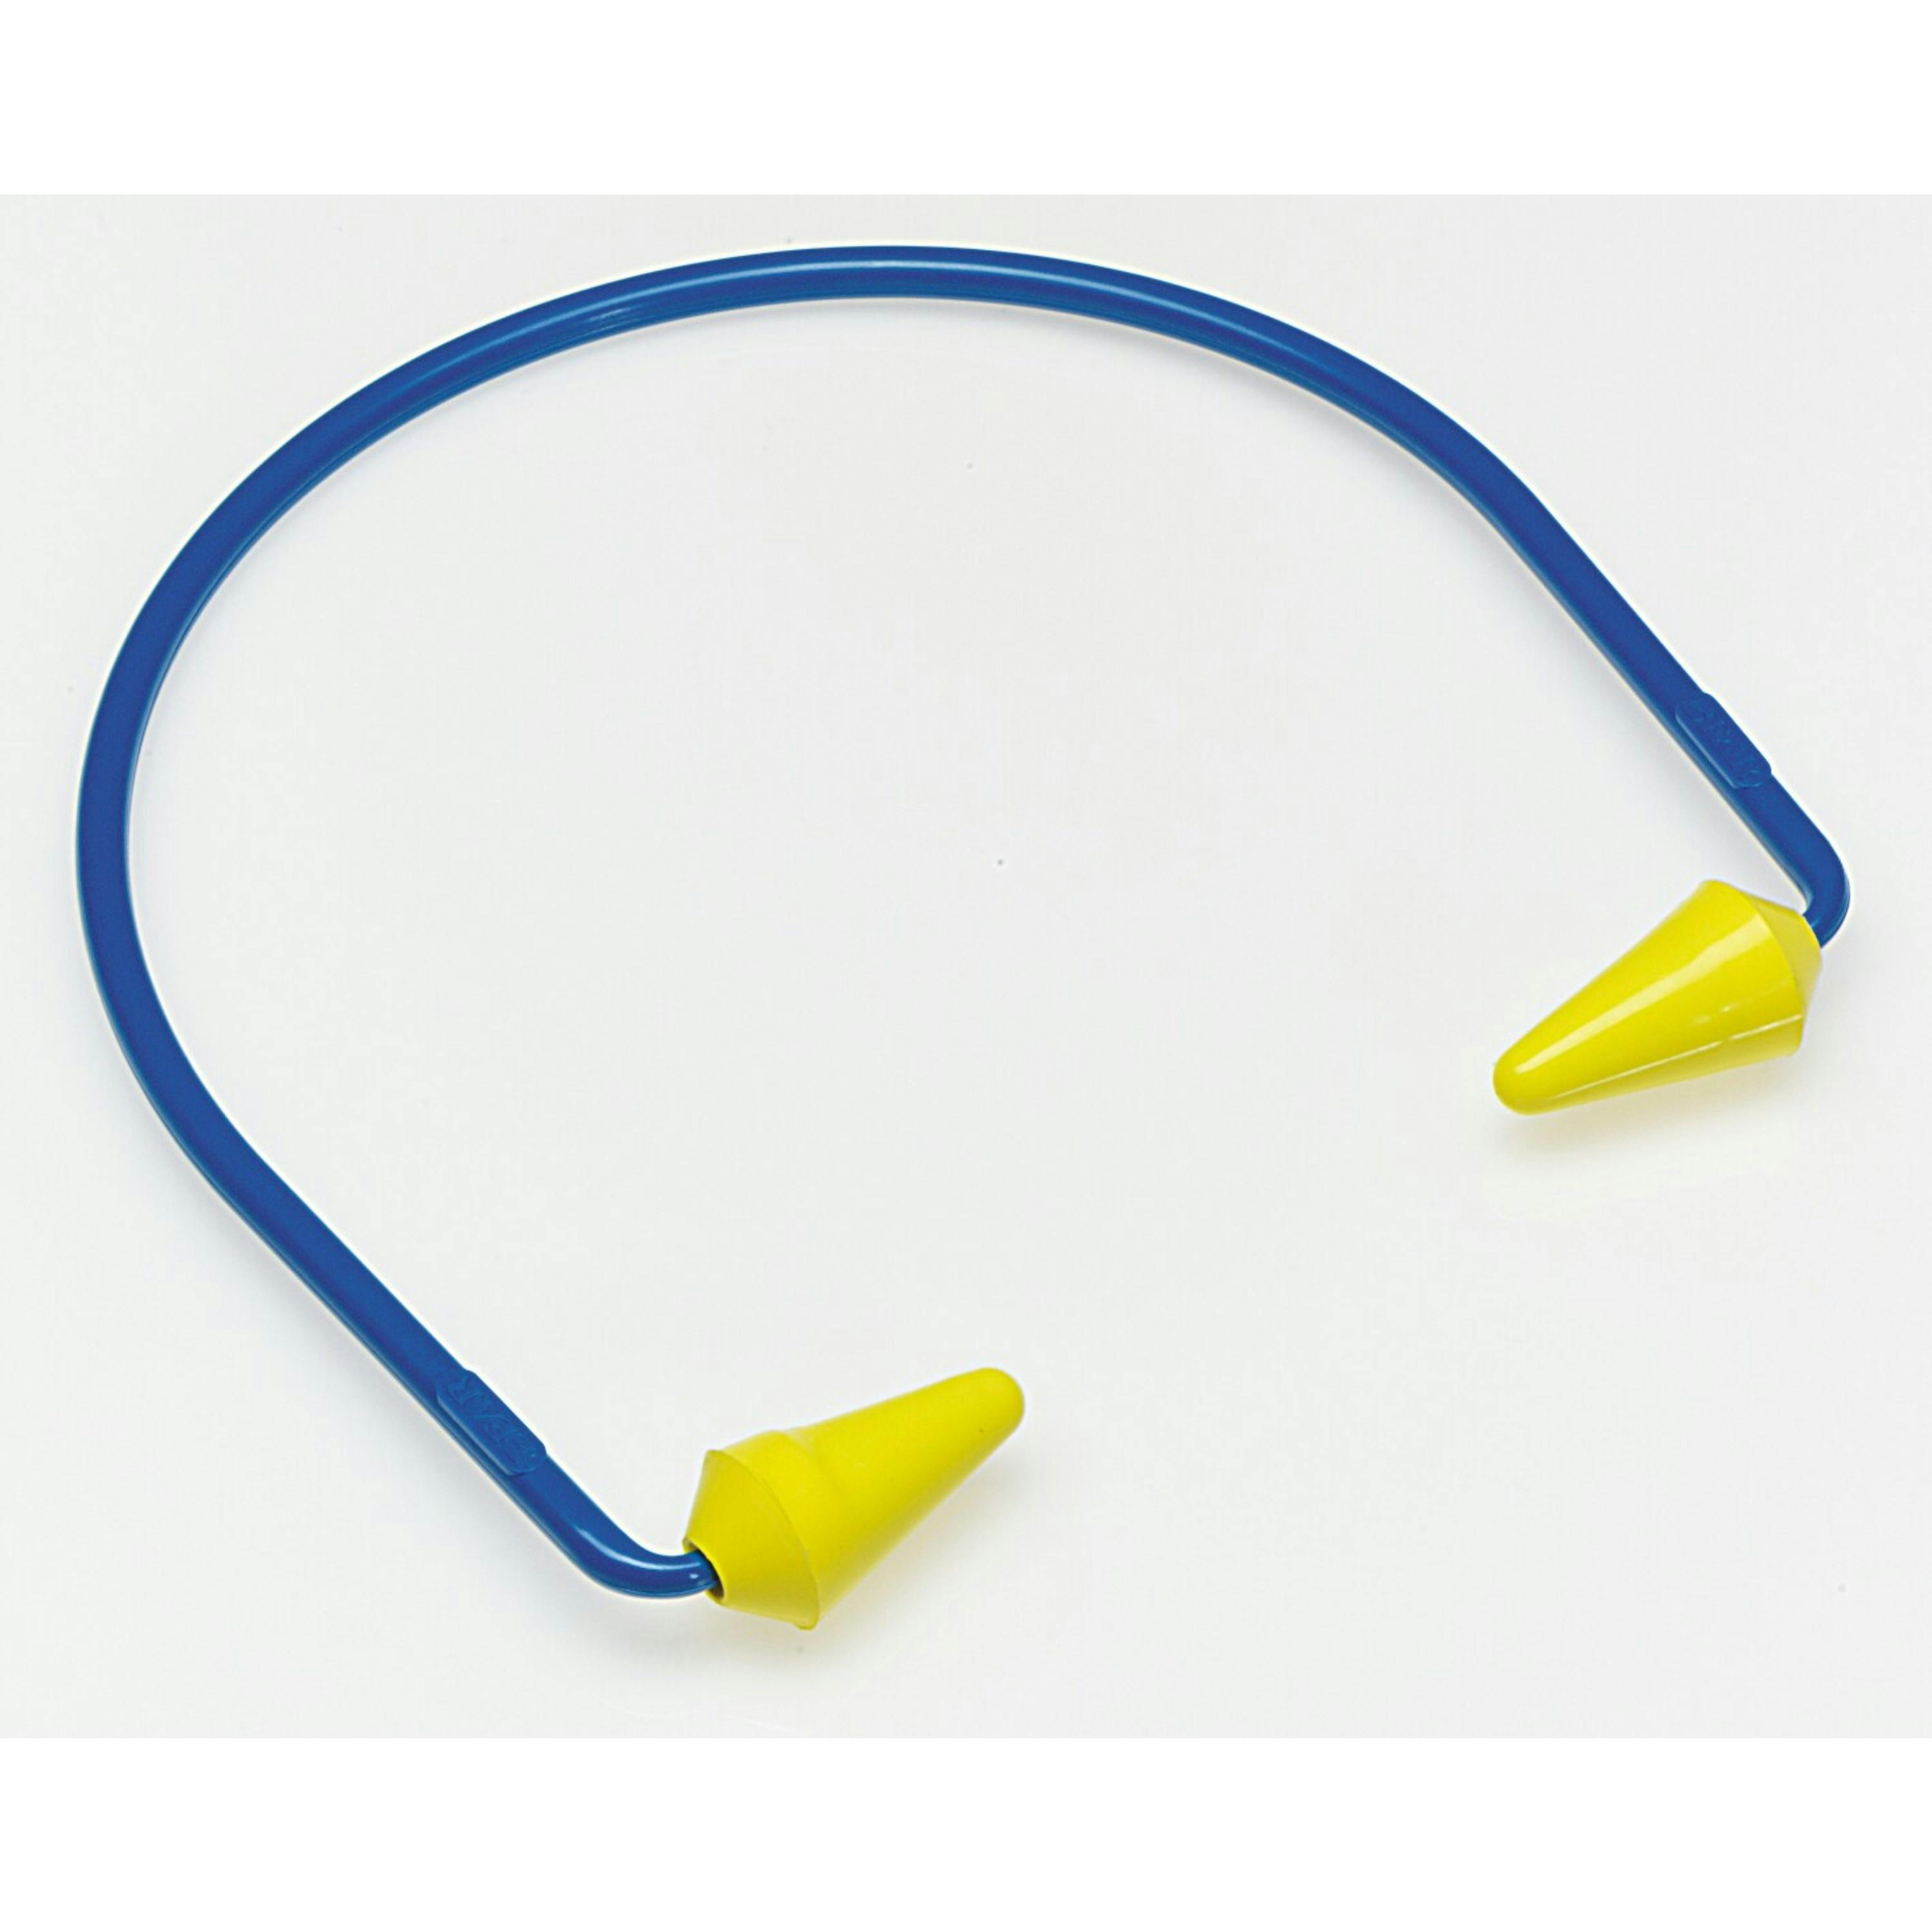 3M™ E-A-R™ Caboflex™ 600 Banded Hearing Protector 320-2001